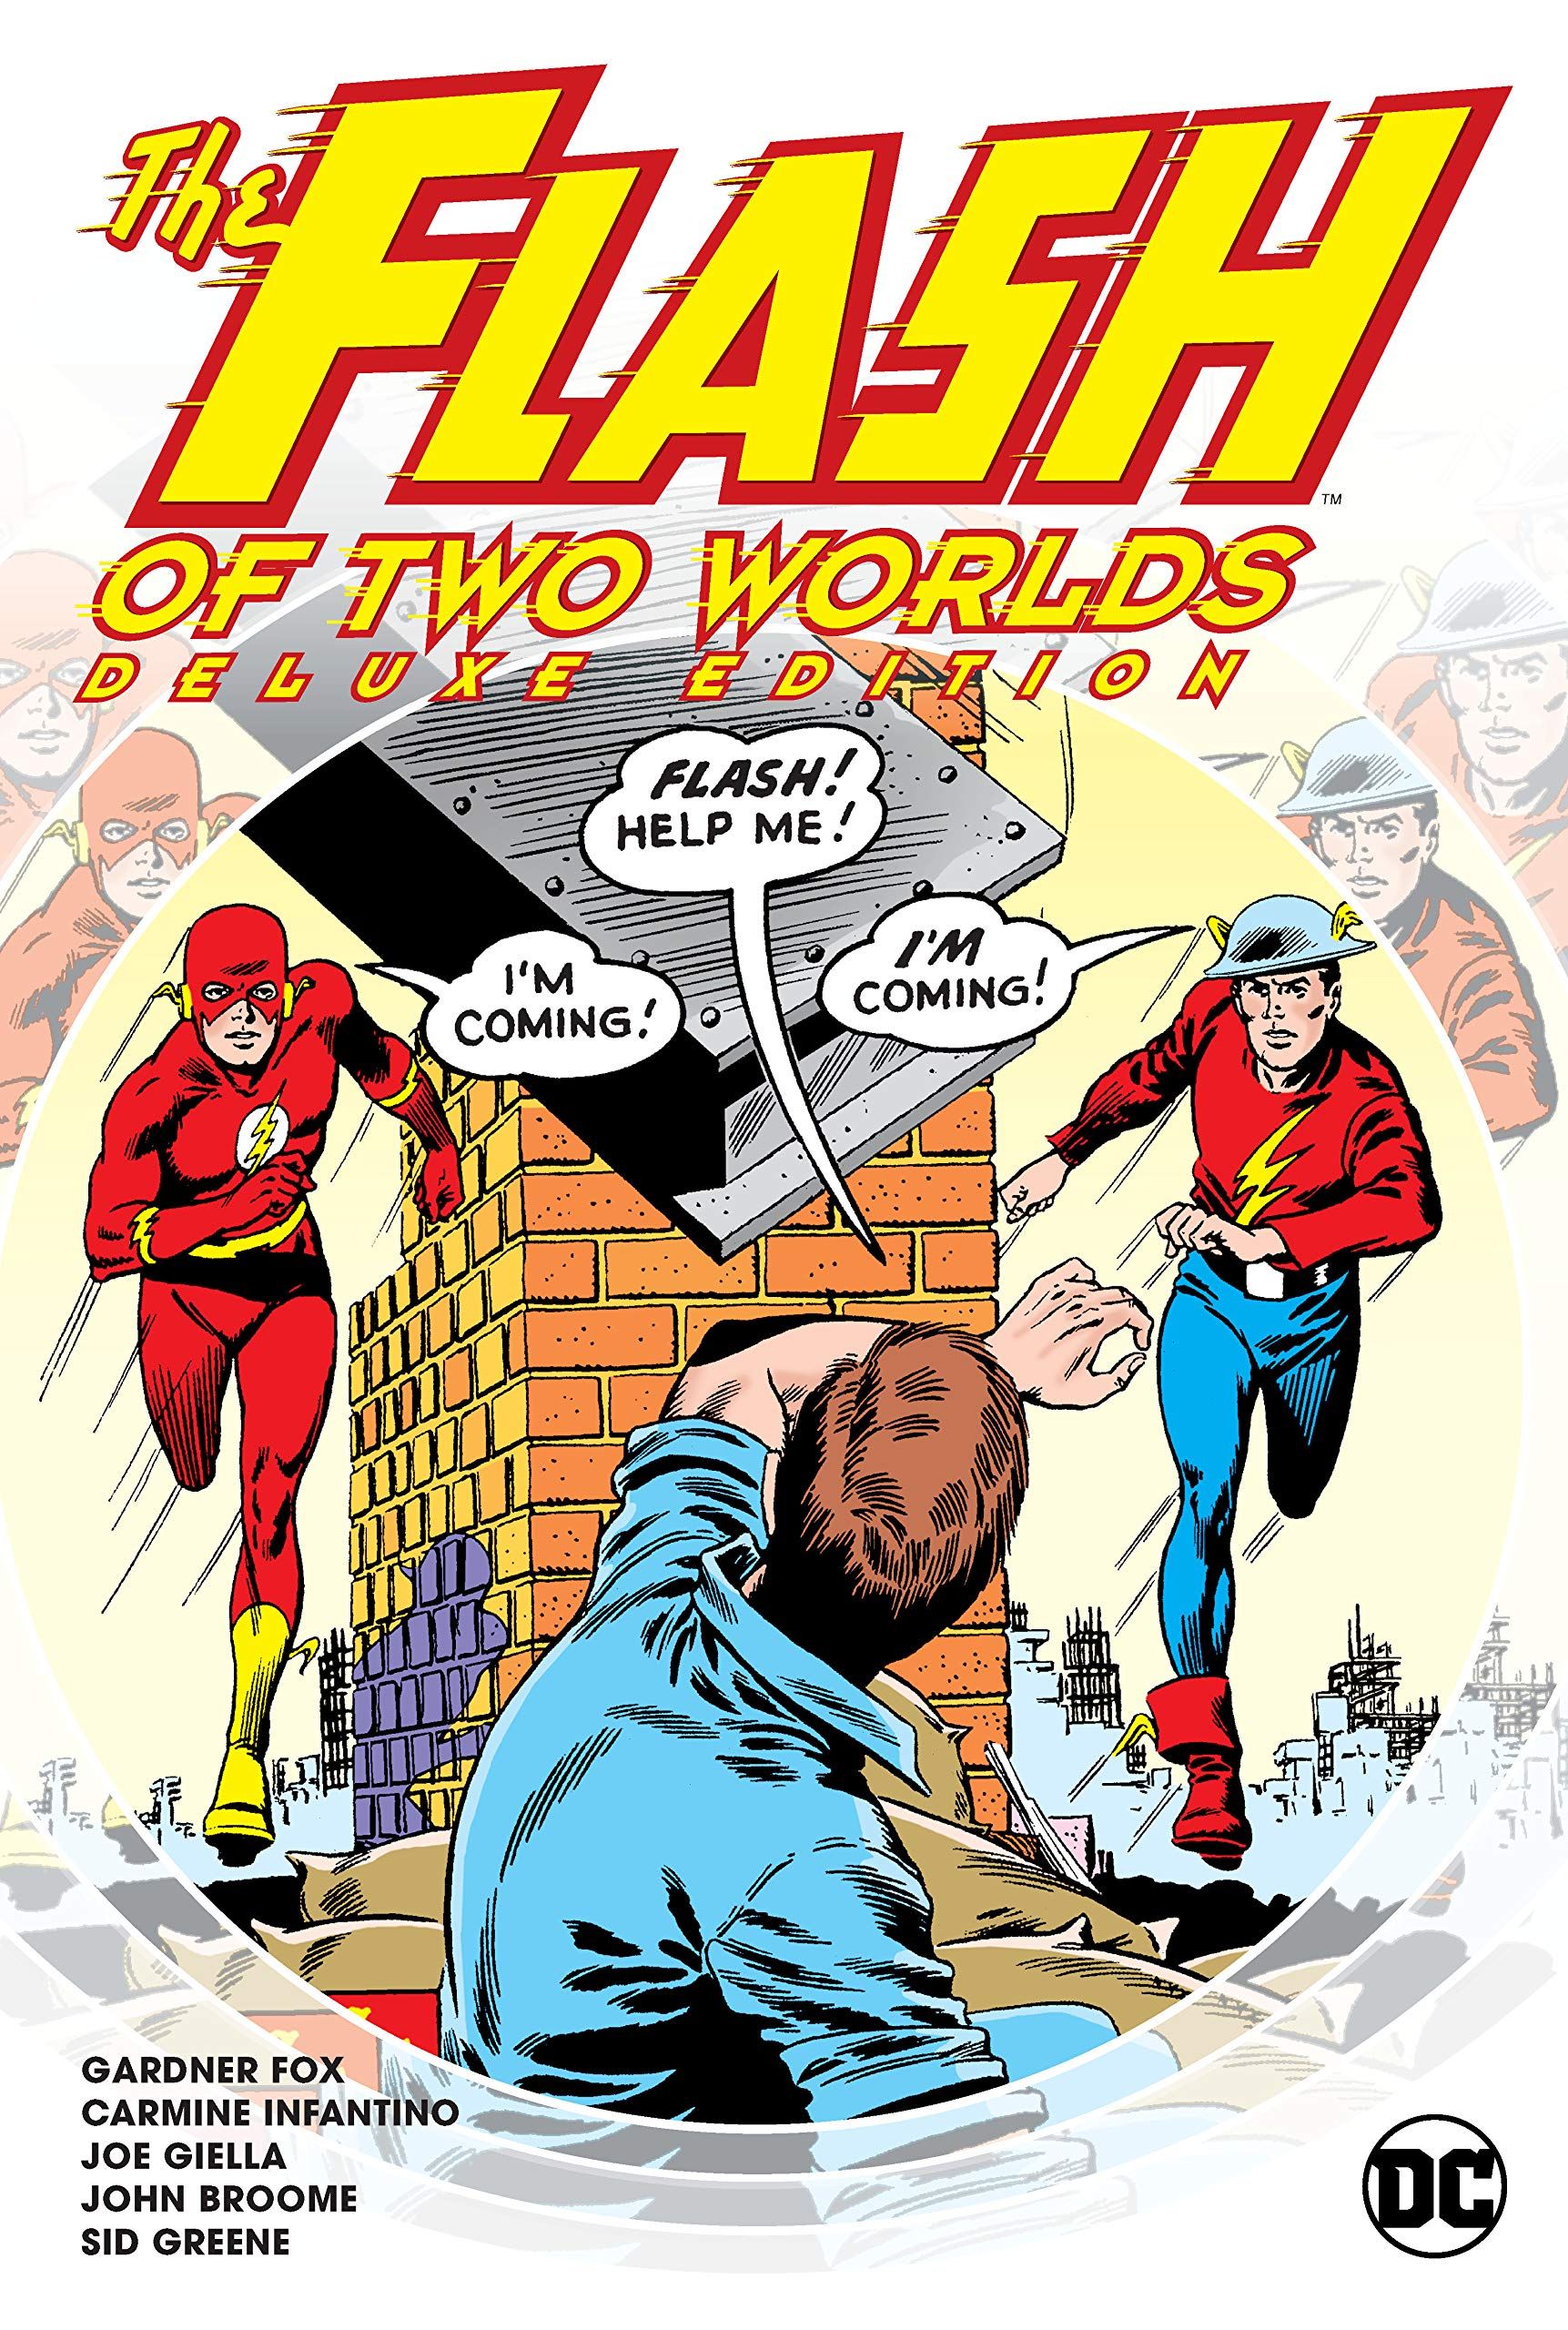 <p><strong>$25.98</strong></p><p>The Flash first burst onto the comic book scene with 1940’s <em>Flash Comics</em> #1, which introduced the world to Jay Garrick, a man who gains super speed after inhaling hard water (comic book science, everybody!). But like the original Green Lantern, Hawkman, and Atom, The Flash disappeared in the 1950s, eventually replaced by new characters bearing the same name. Comic readers at the time figured the World War II heroes were gone forever, until a fateful meeting in <em>The Flash</em> #123. The story by Gardner Fox, penciled again by Carmine Infantino, finds Barry accidentally traveling from his hometown Central City to Jay Garrick’s hometown—in another reality. </p><p>Just like “Mystery of the Human Thunderbolt” changed comics by doing away with old heroes like Garrick, “The Flash of Two Worlds” changed the genre by bringing them back. The story revealed that Garrick (and by extension, all of the early heroes, including Golden Age Batman and Superman) lived on Earth-Two, one of many alternate realities in the DC Universe. Thus, “The Flash of Two Worlds” brought multiverses into the mainstream, paving the way for modern hit movies such as <em><a href="https://www.menshealth.com/entertainment/a42447273/how-to-watch-everything-everywhere-all-at-once/">Everything Everywhere All at Once</a></em> and <em><a href="https://www.menshealth.com/entertainment/a44067652/shameik-moore-spider-man-across-the-spider-verse-interview/">Spider-Man: Across the Spider-Verse</a></em>.</p>